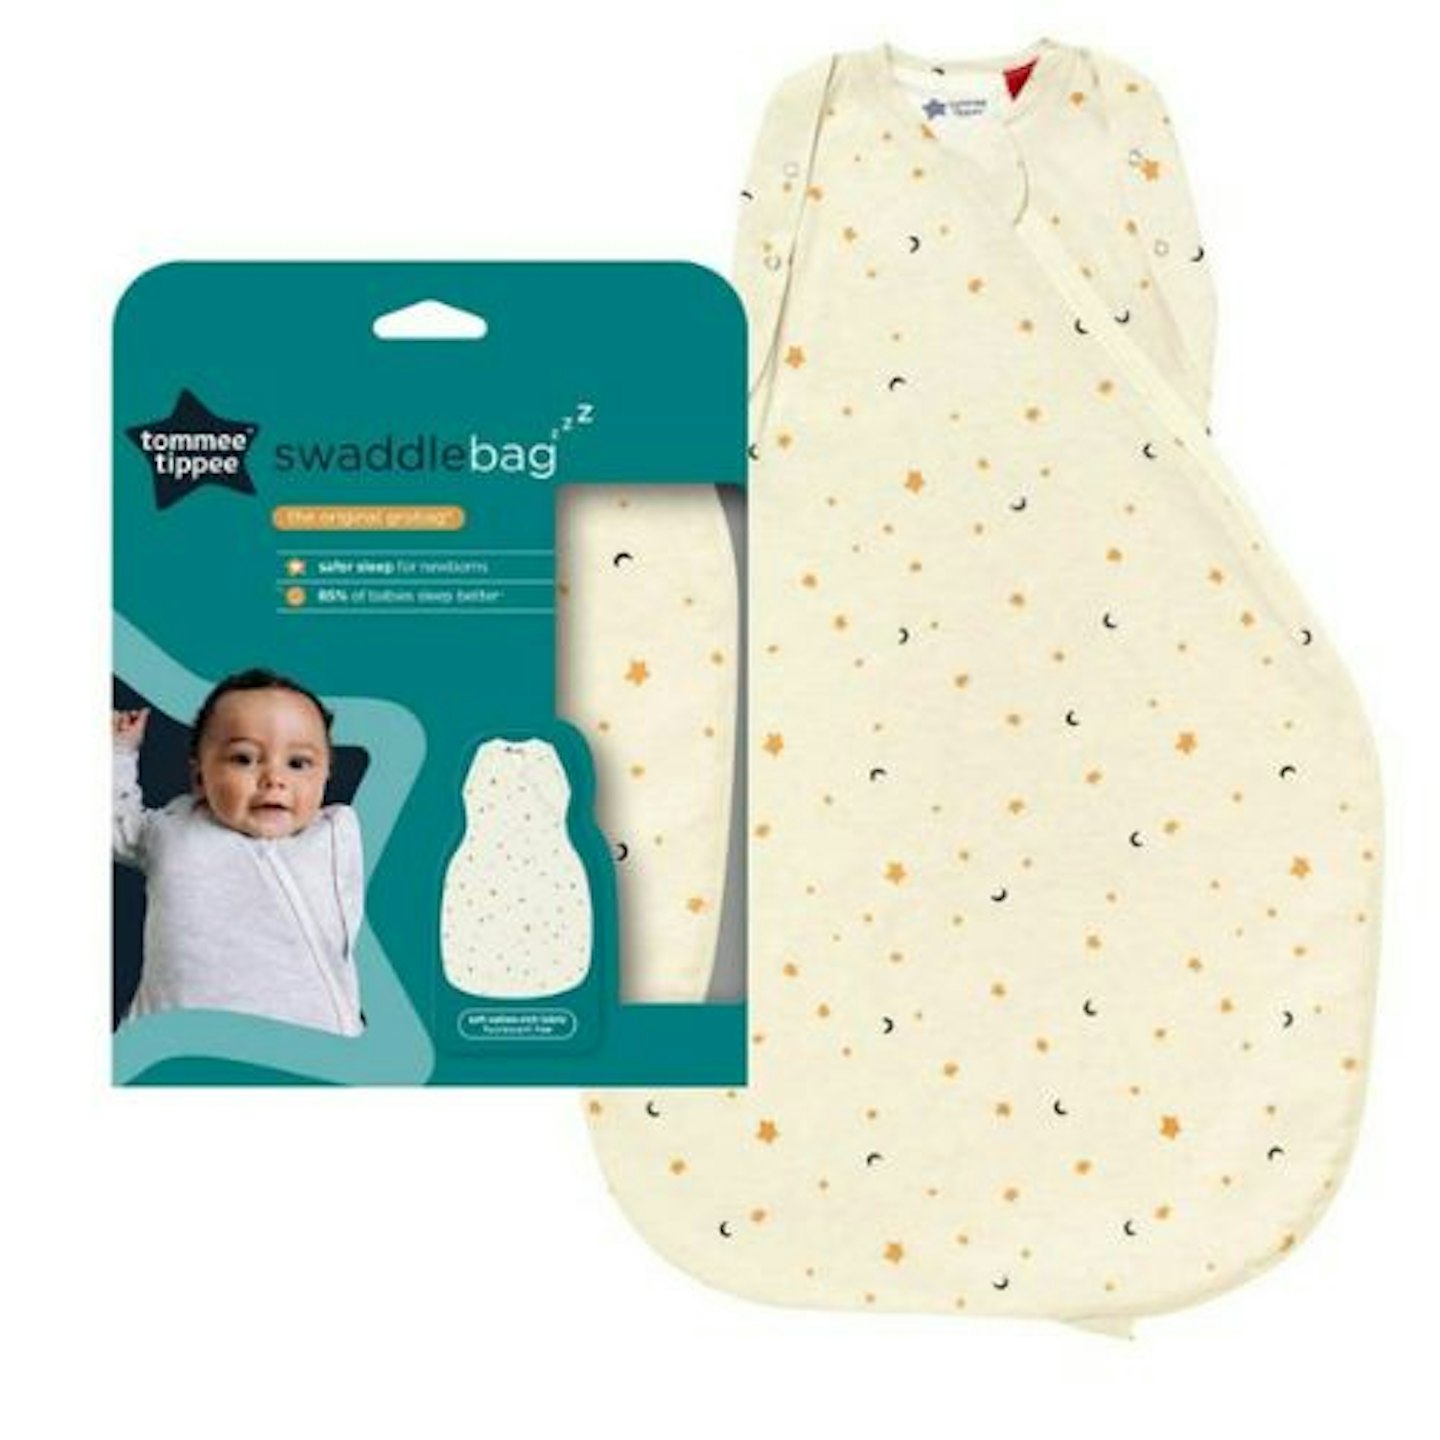 Tommee Tippee The Original Grobag Swaddle Bag